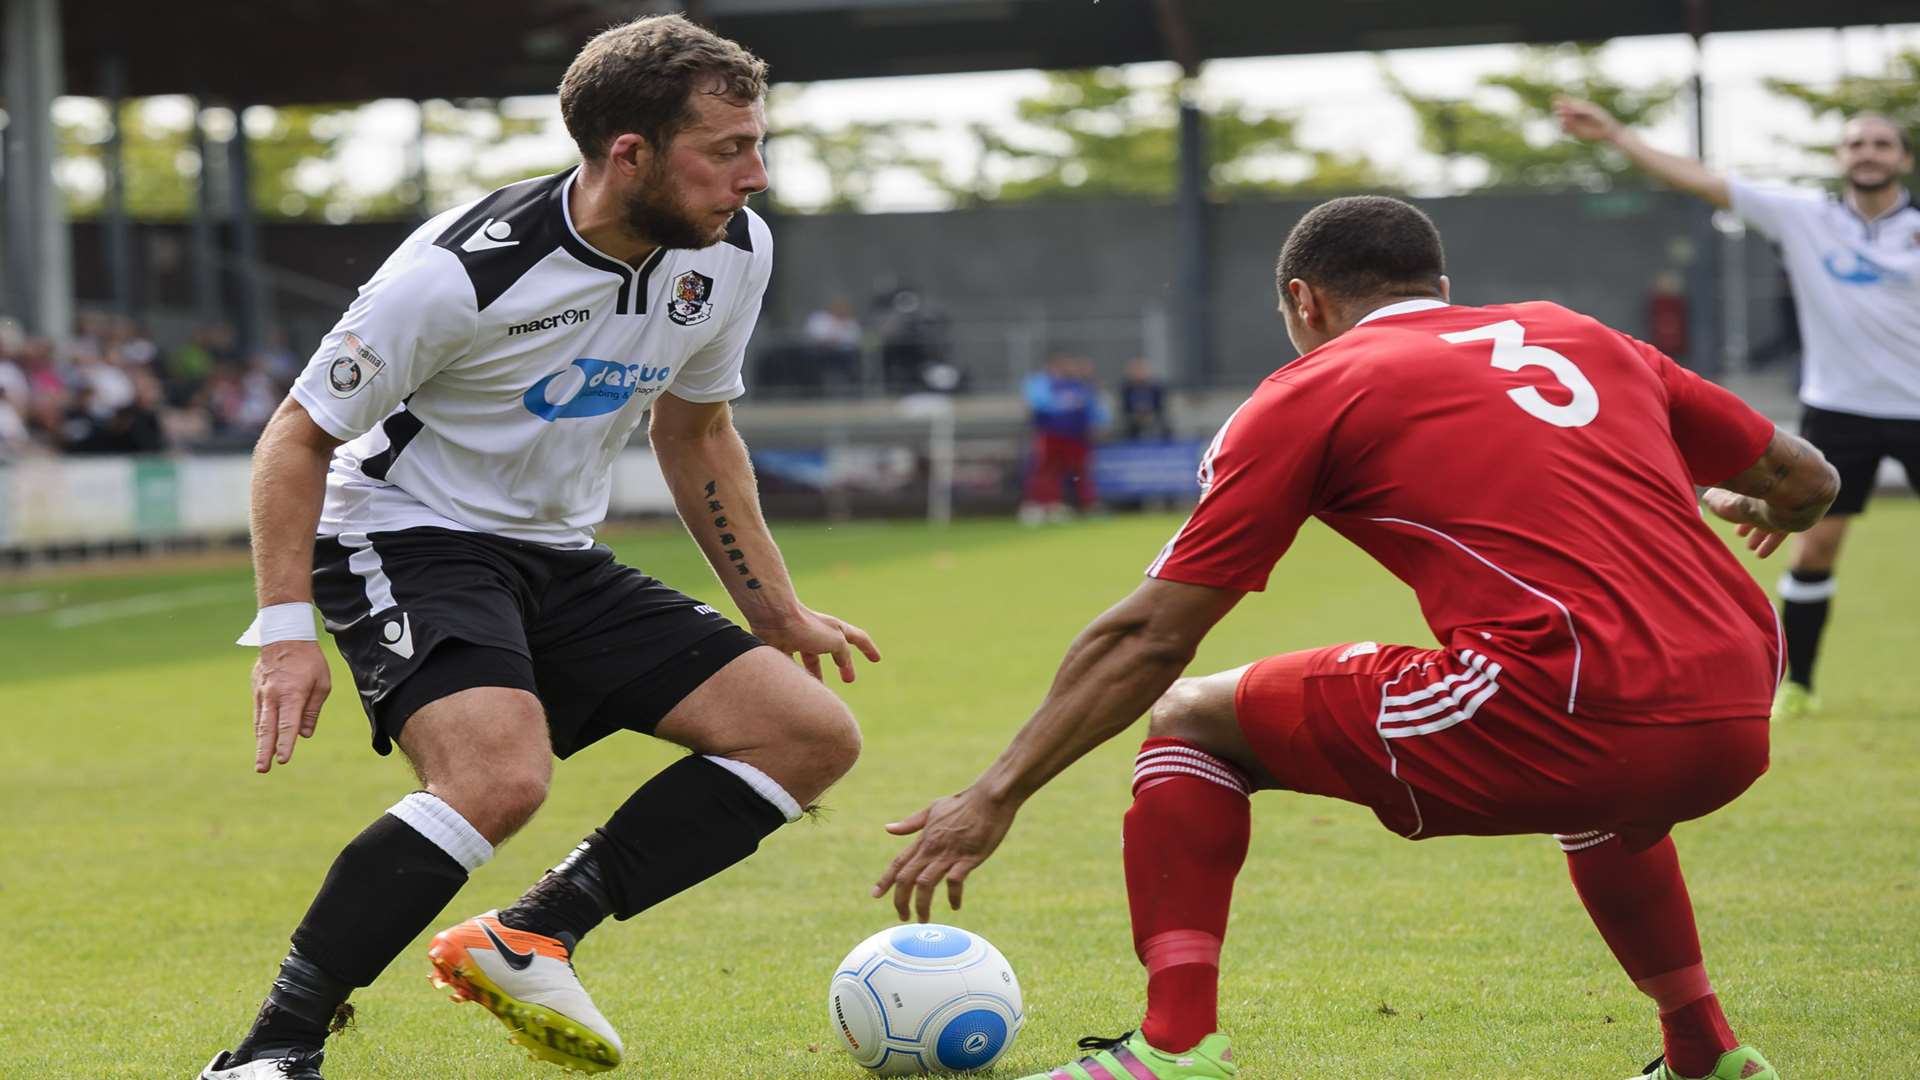 Ryan Hayes has played his way back into contention for a place in the Dartford starting line-up Picture: Andy Payton